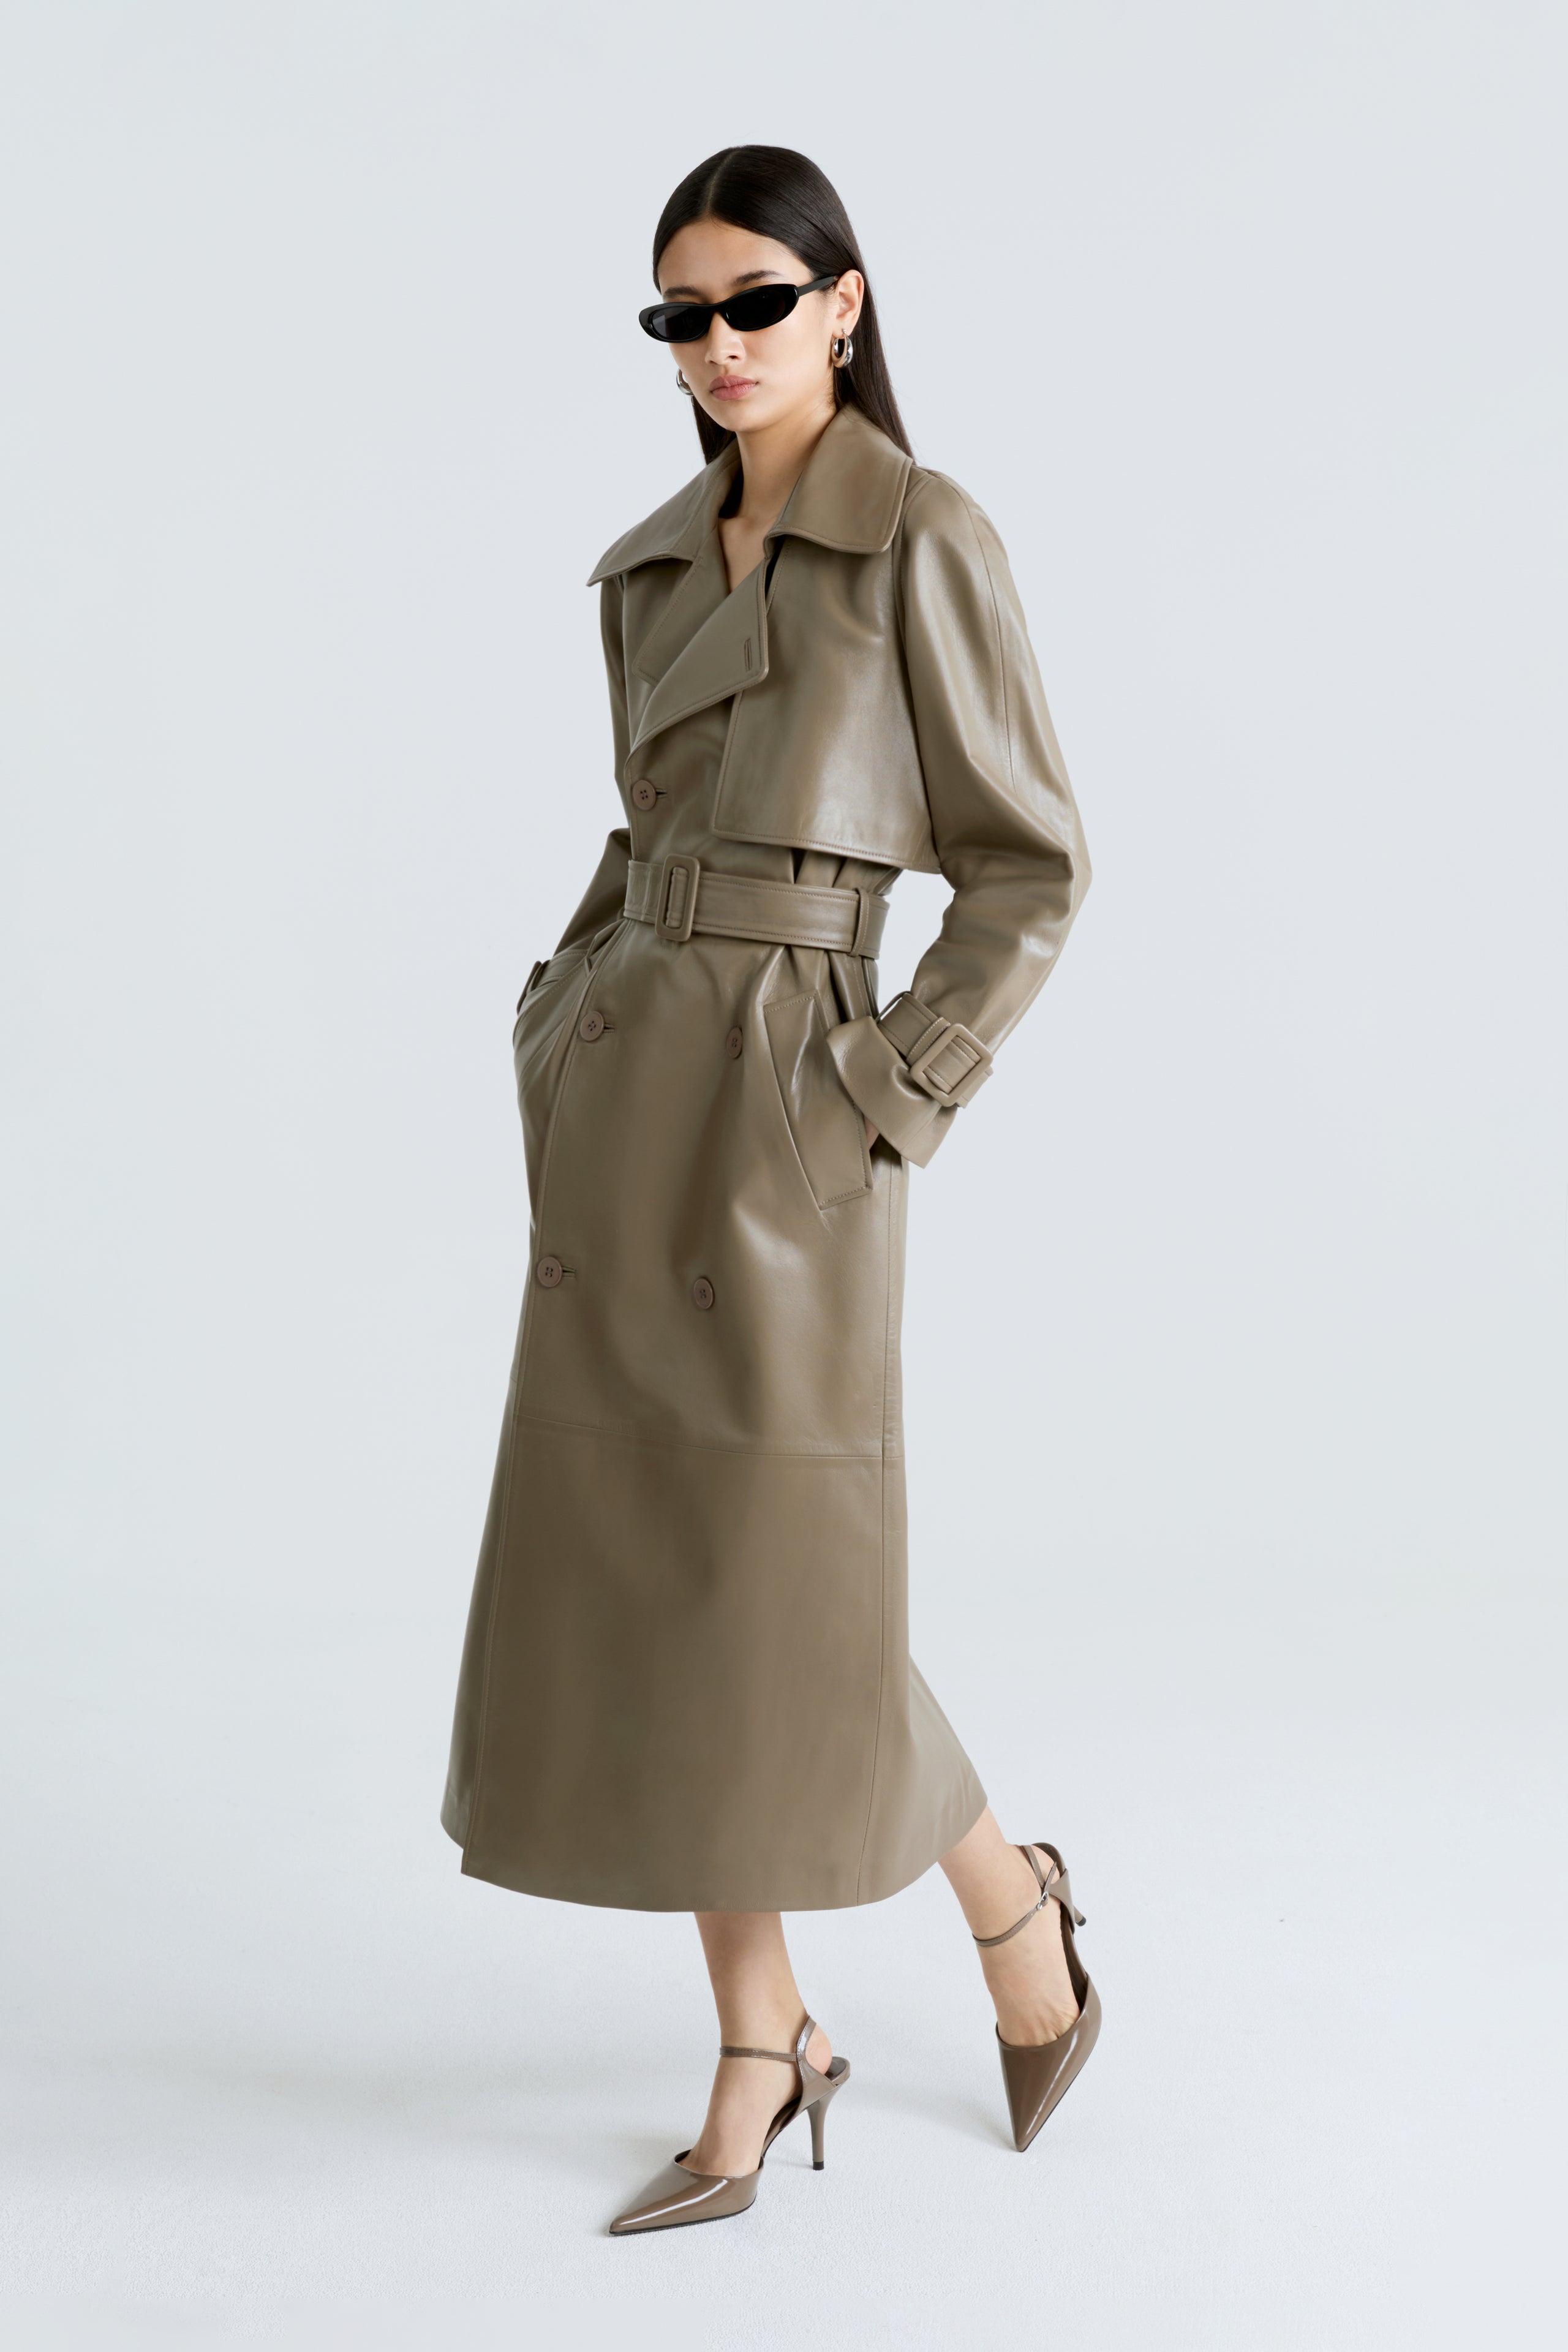 Model is wearing the Henri Cepe Leather Trench Coat Side